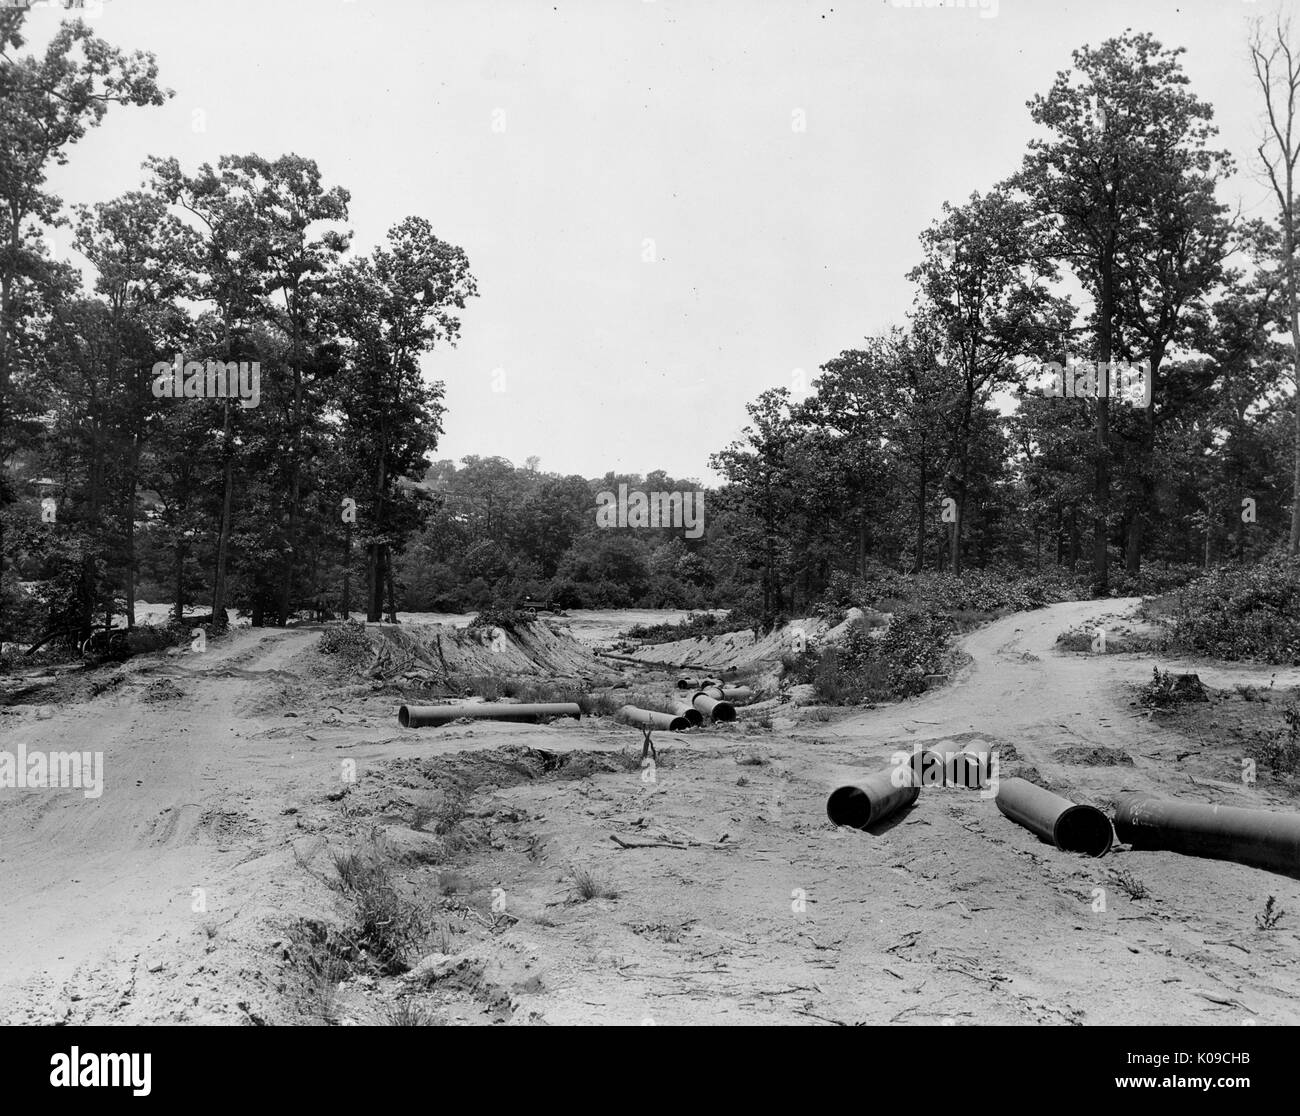 Northwood neighborhood land under construction, there are large pipes scattered on the uneven dirt, there are trees and bushes in the background that are bordering the land, United States, 1950. Stock Photo